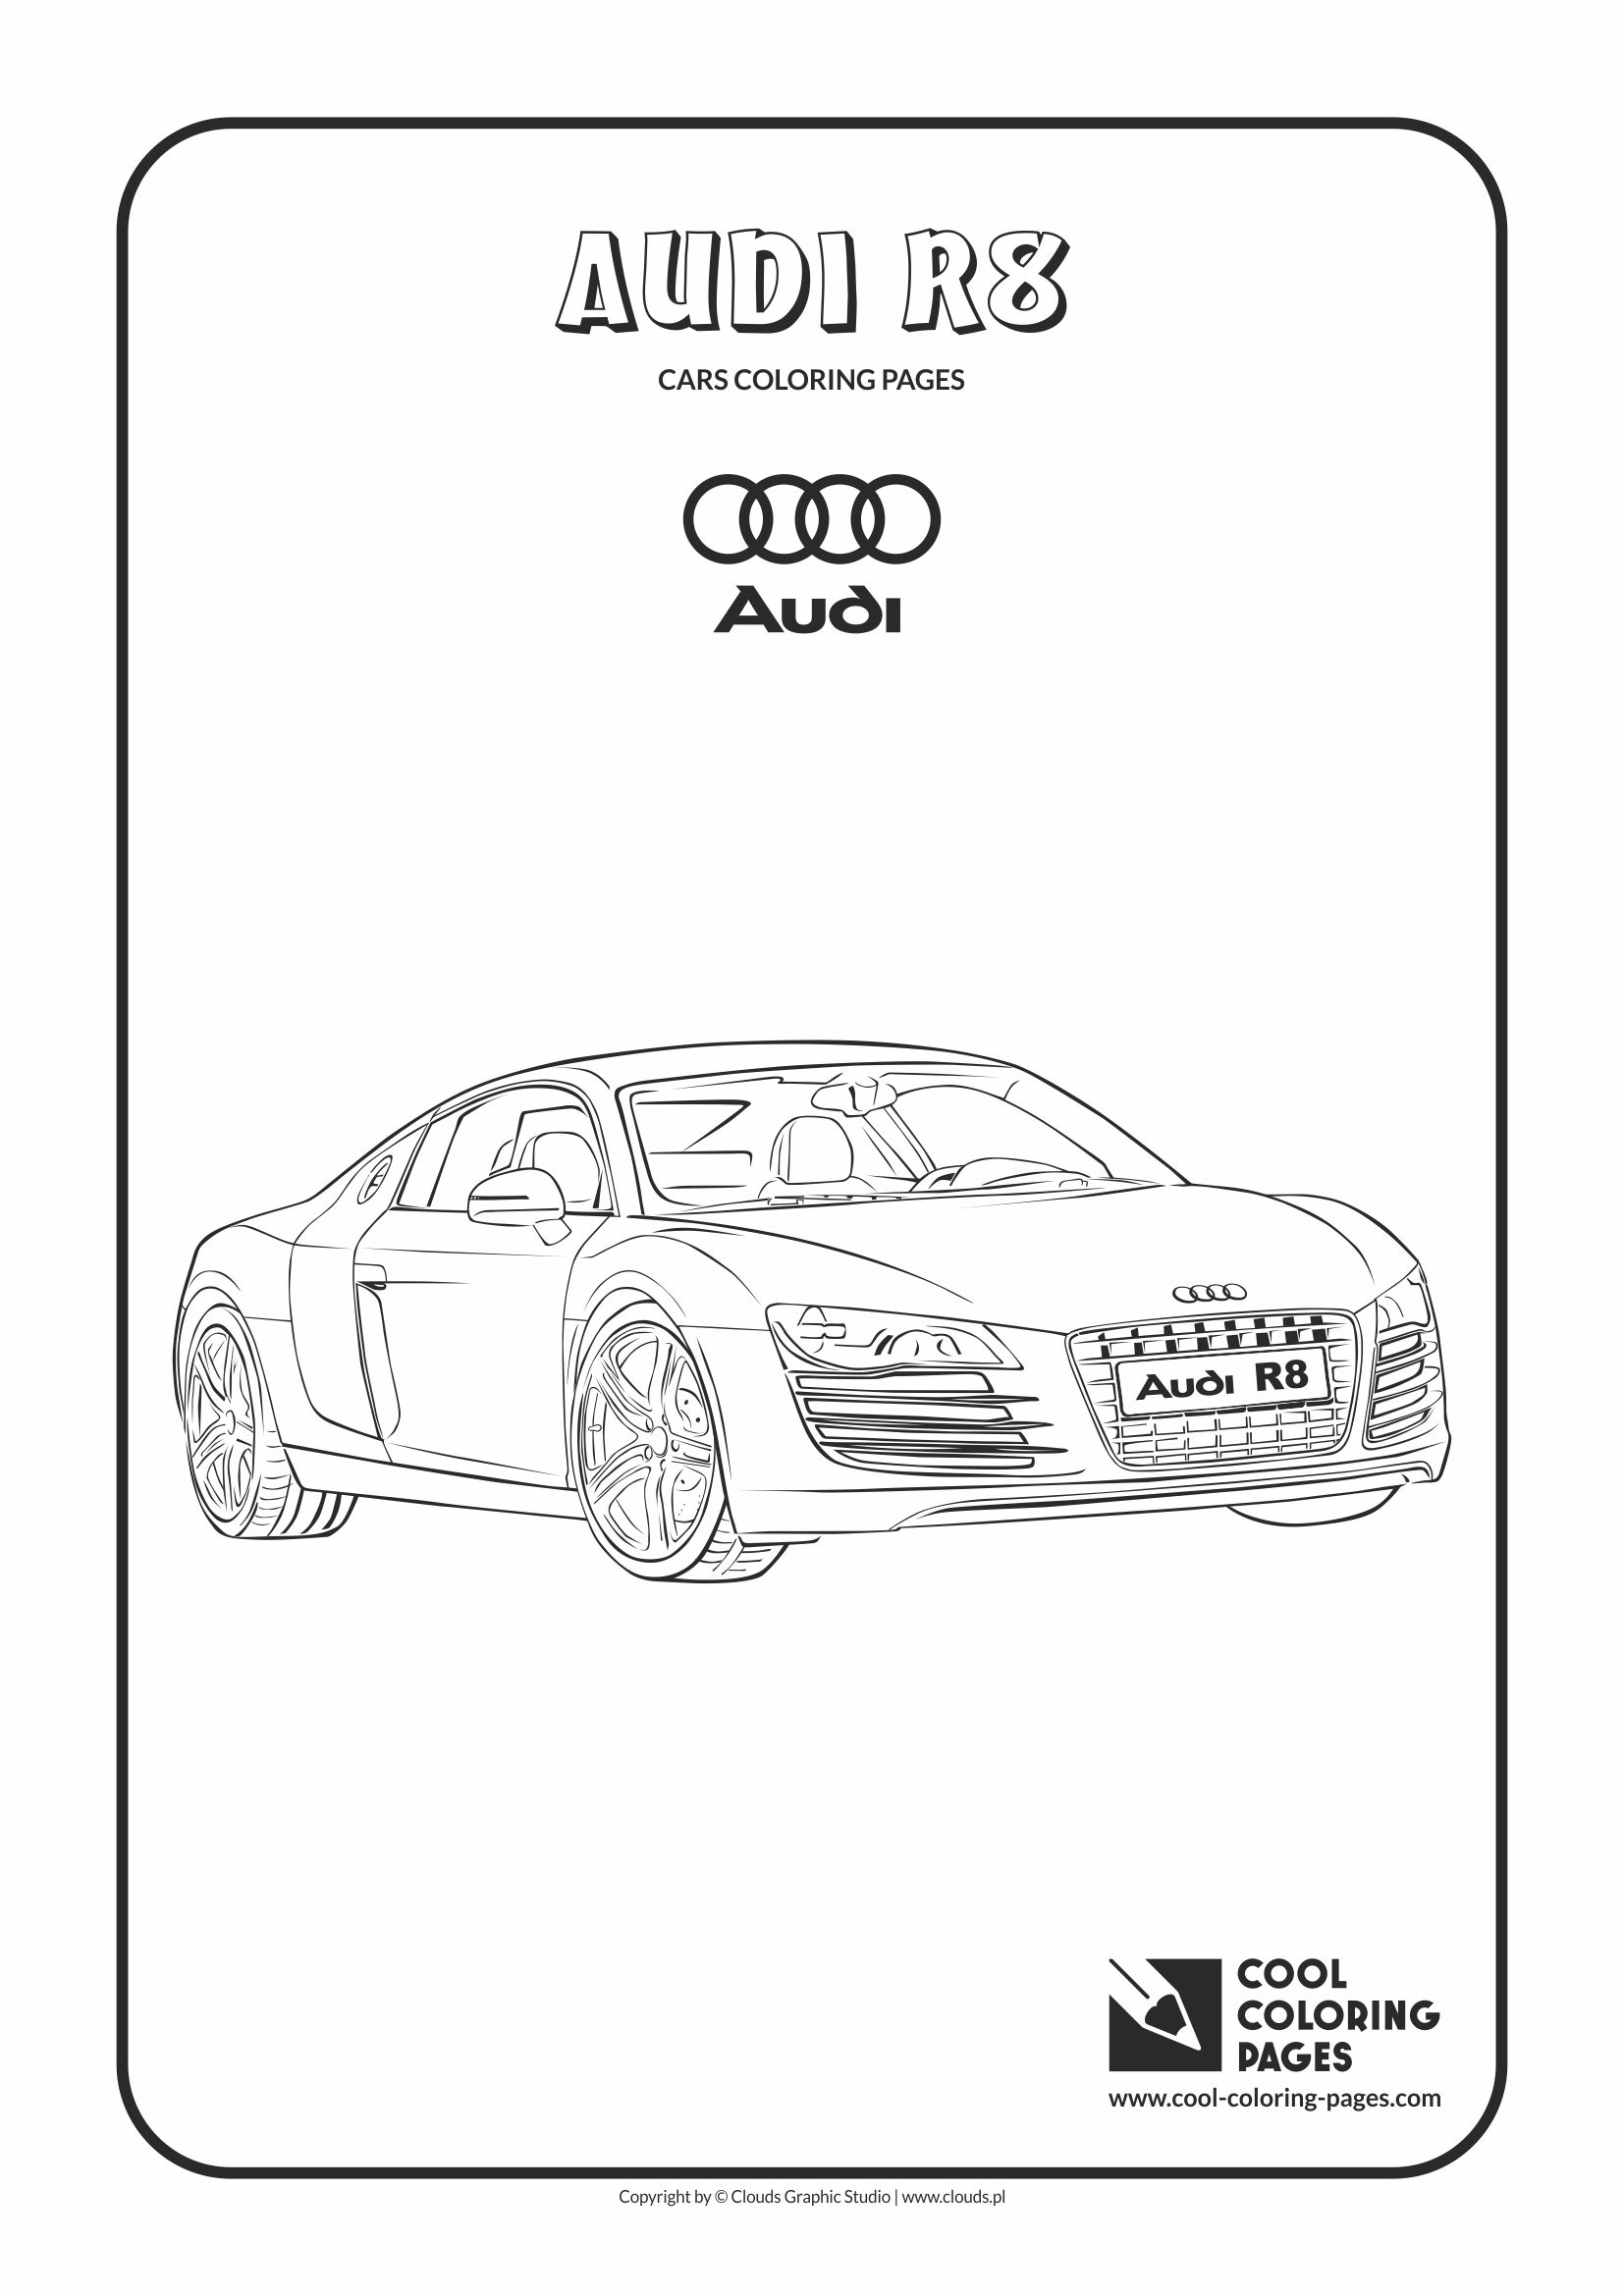 Cool Coloring Pages - Vehicles / Audi R8 / Coloring page with Audi R8